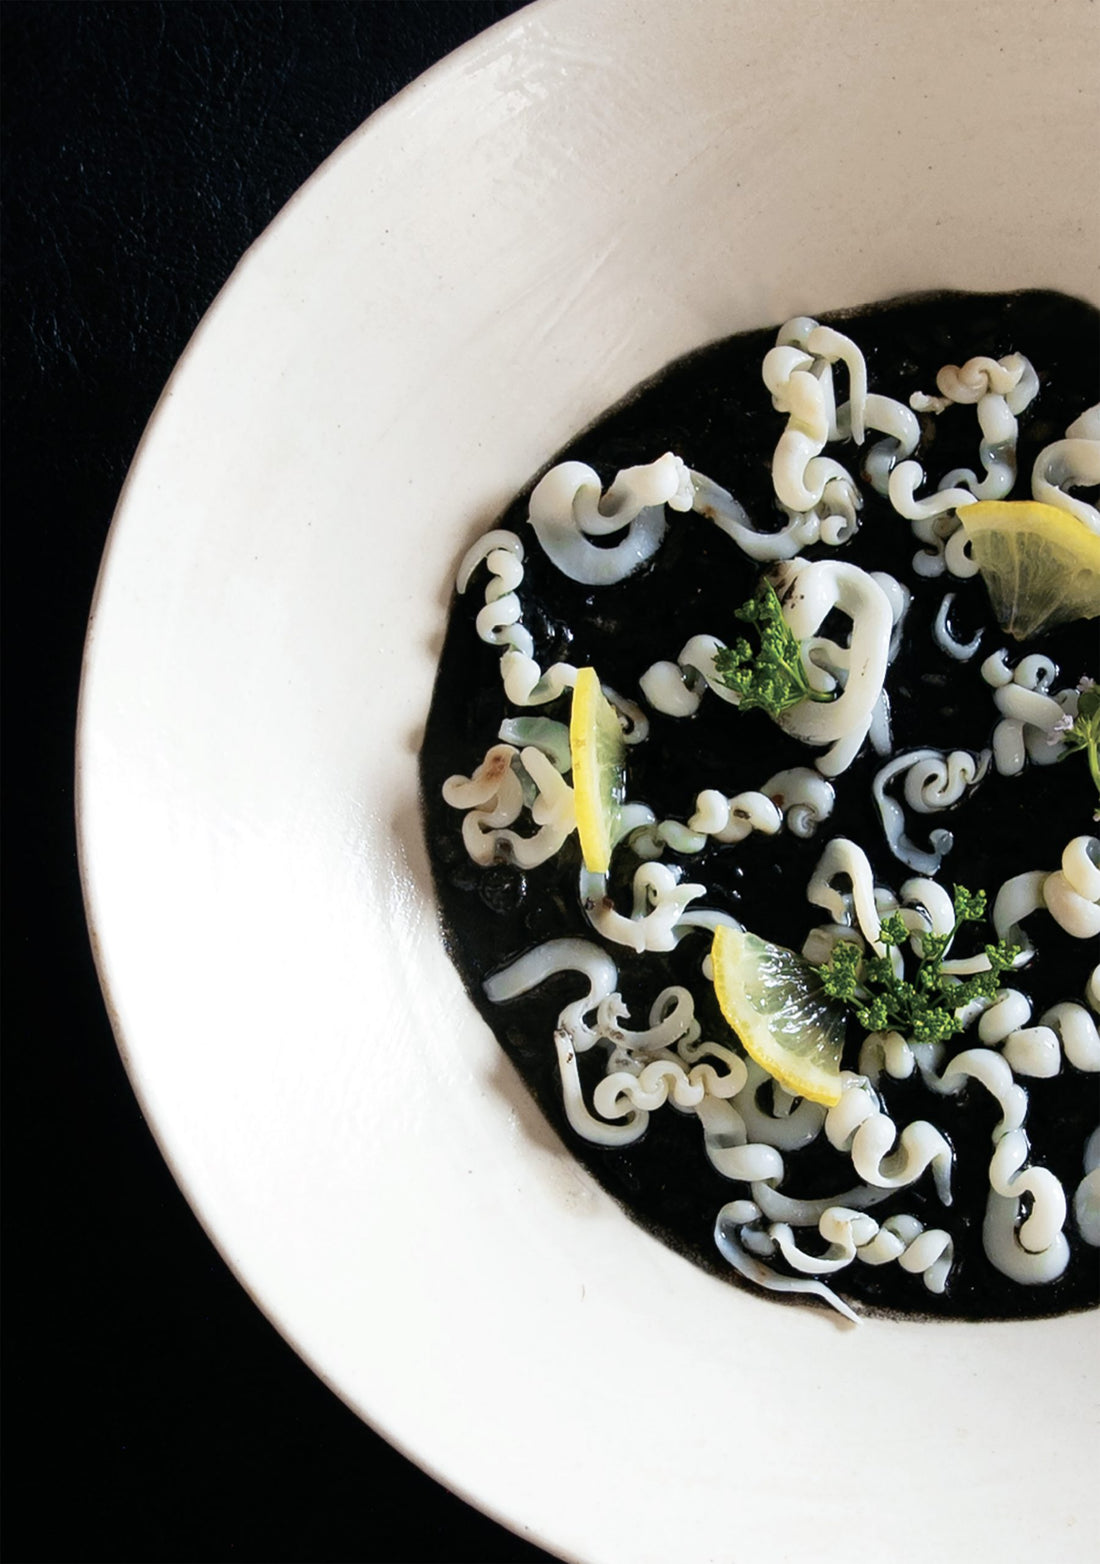 Recipe: Squid ink risotto, from 'Siciliano' by Joe Vargetto